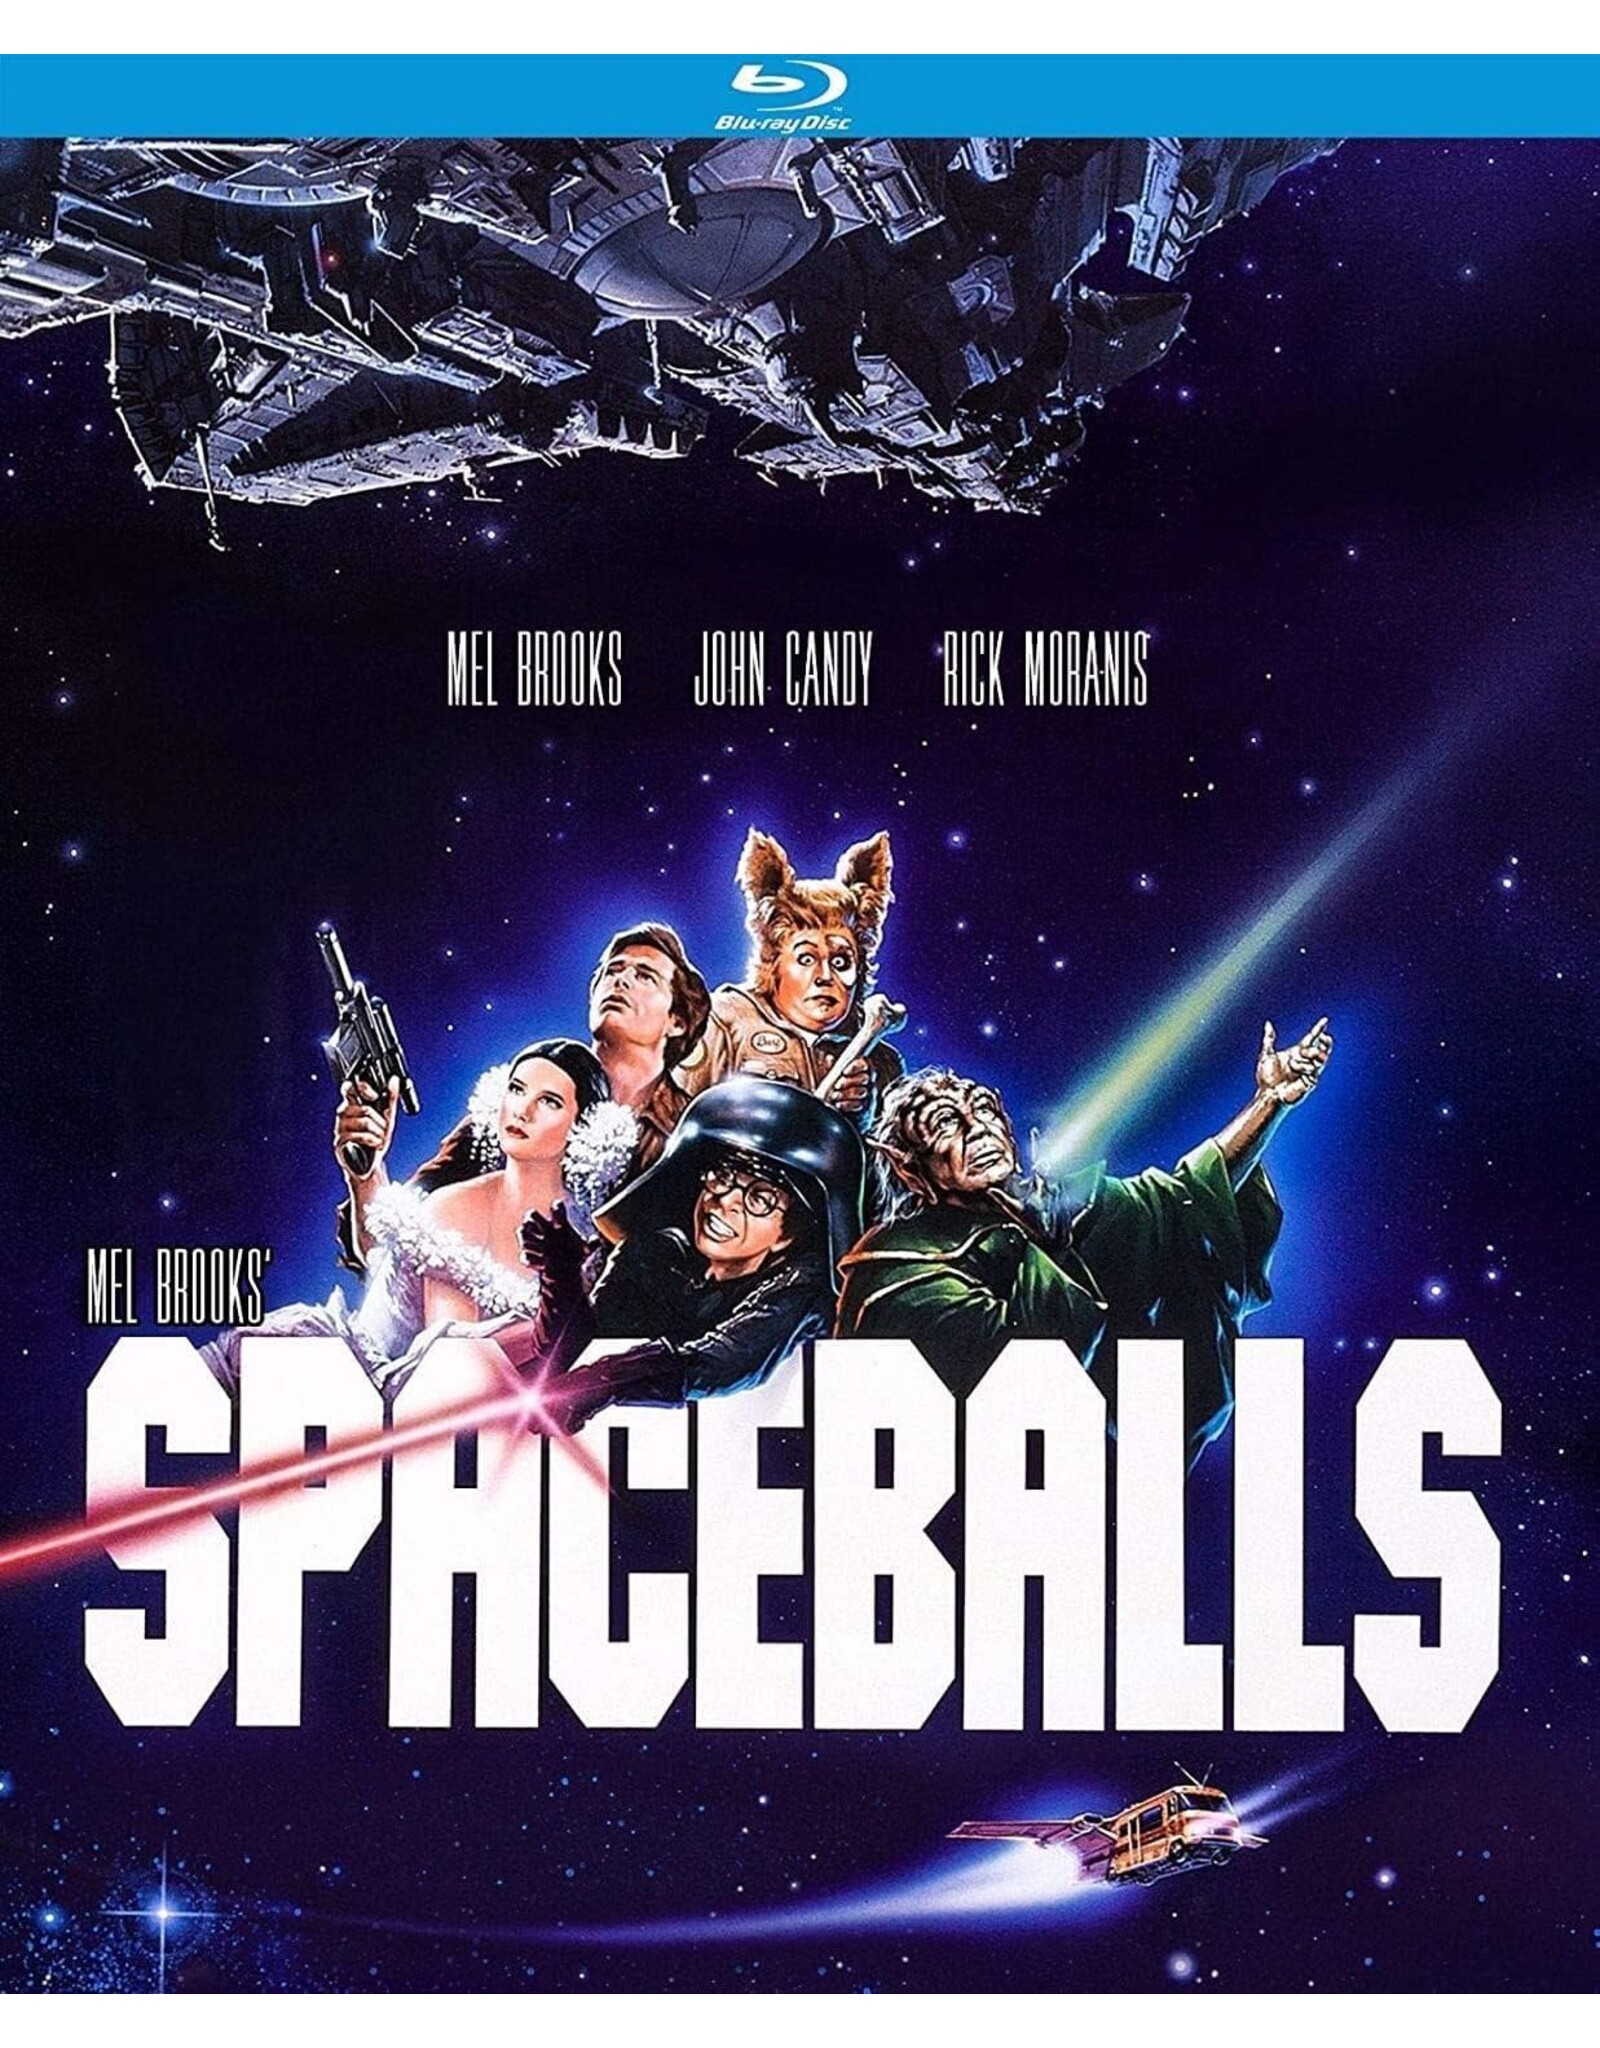 Cult & Cool Spaceballs Special Edition - Kino Lorber (Brand New)